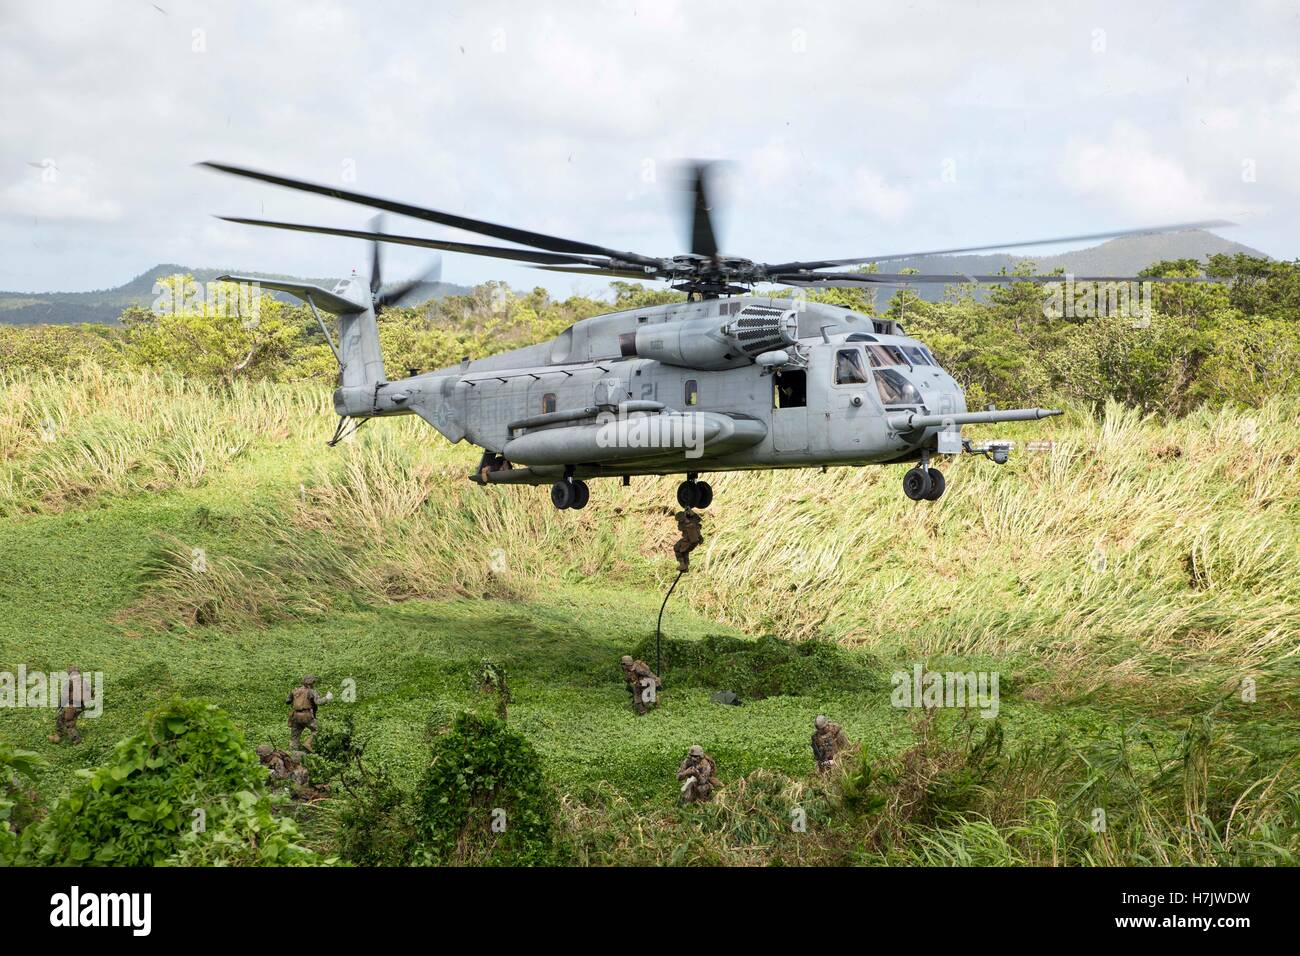 U.S. soldiers fast-rope descend from a CH-53 Super Stallion helicopter during a hostage village training scenario at the Central Training Area July 18, 2014 in Okinawa, Japan. Stock Photo